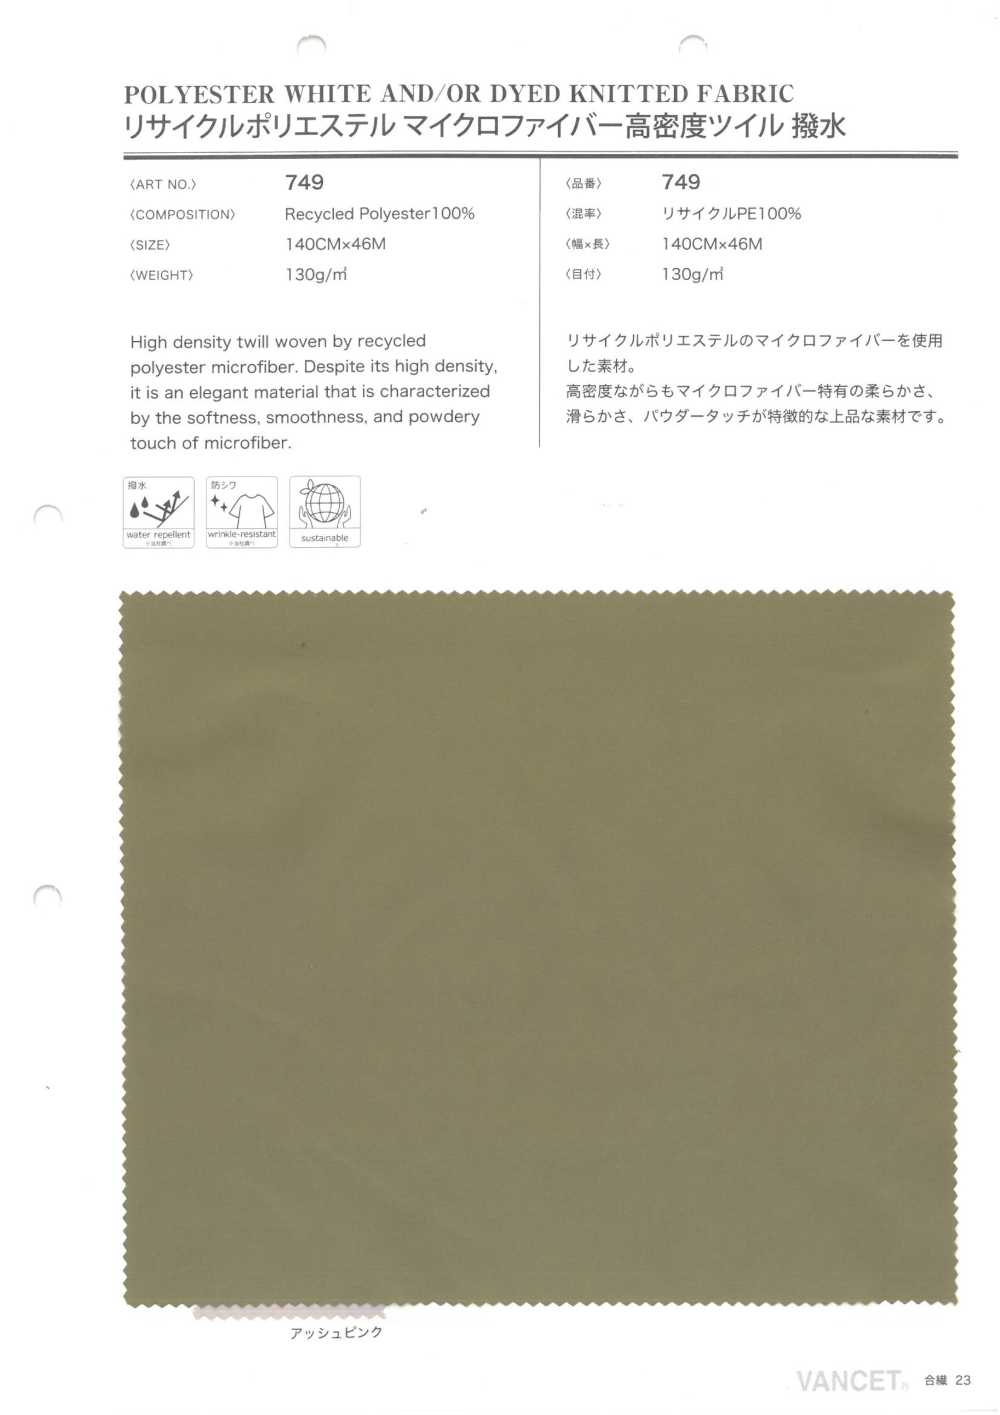 749 Recycled Polyester Microfiber High Density Twill Water Repellent[Textile / Fabric] VANCET